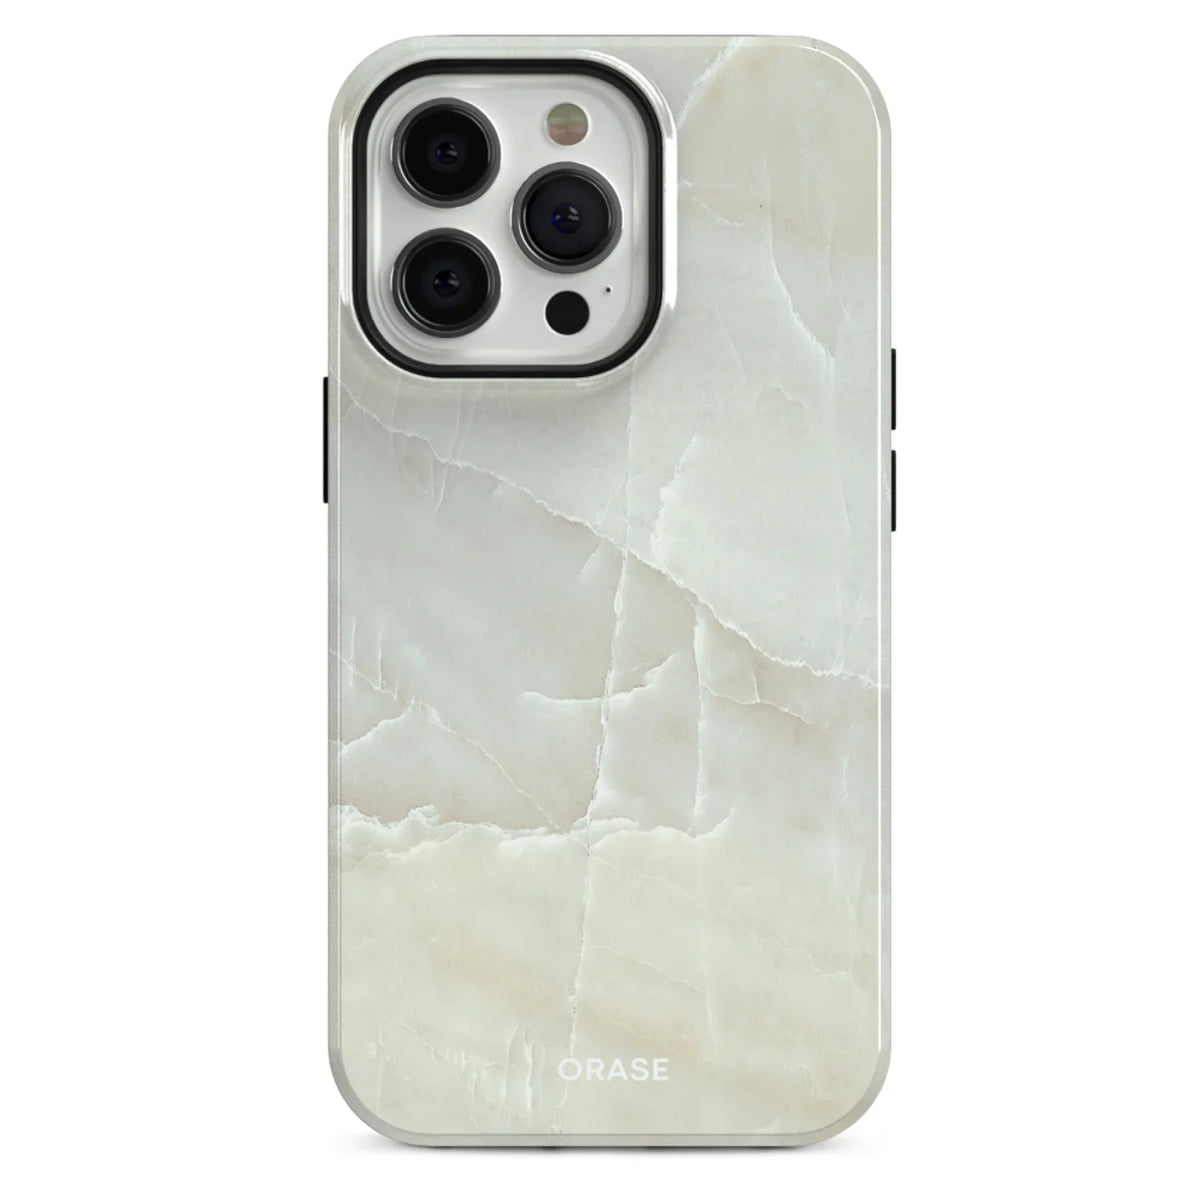 Ivory Marble iPhone Case - iPhone 12